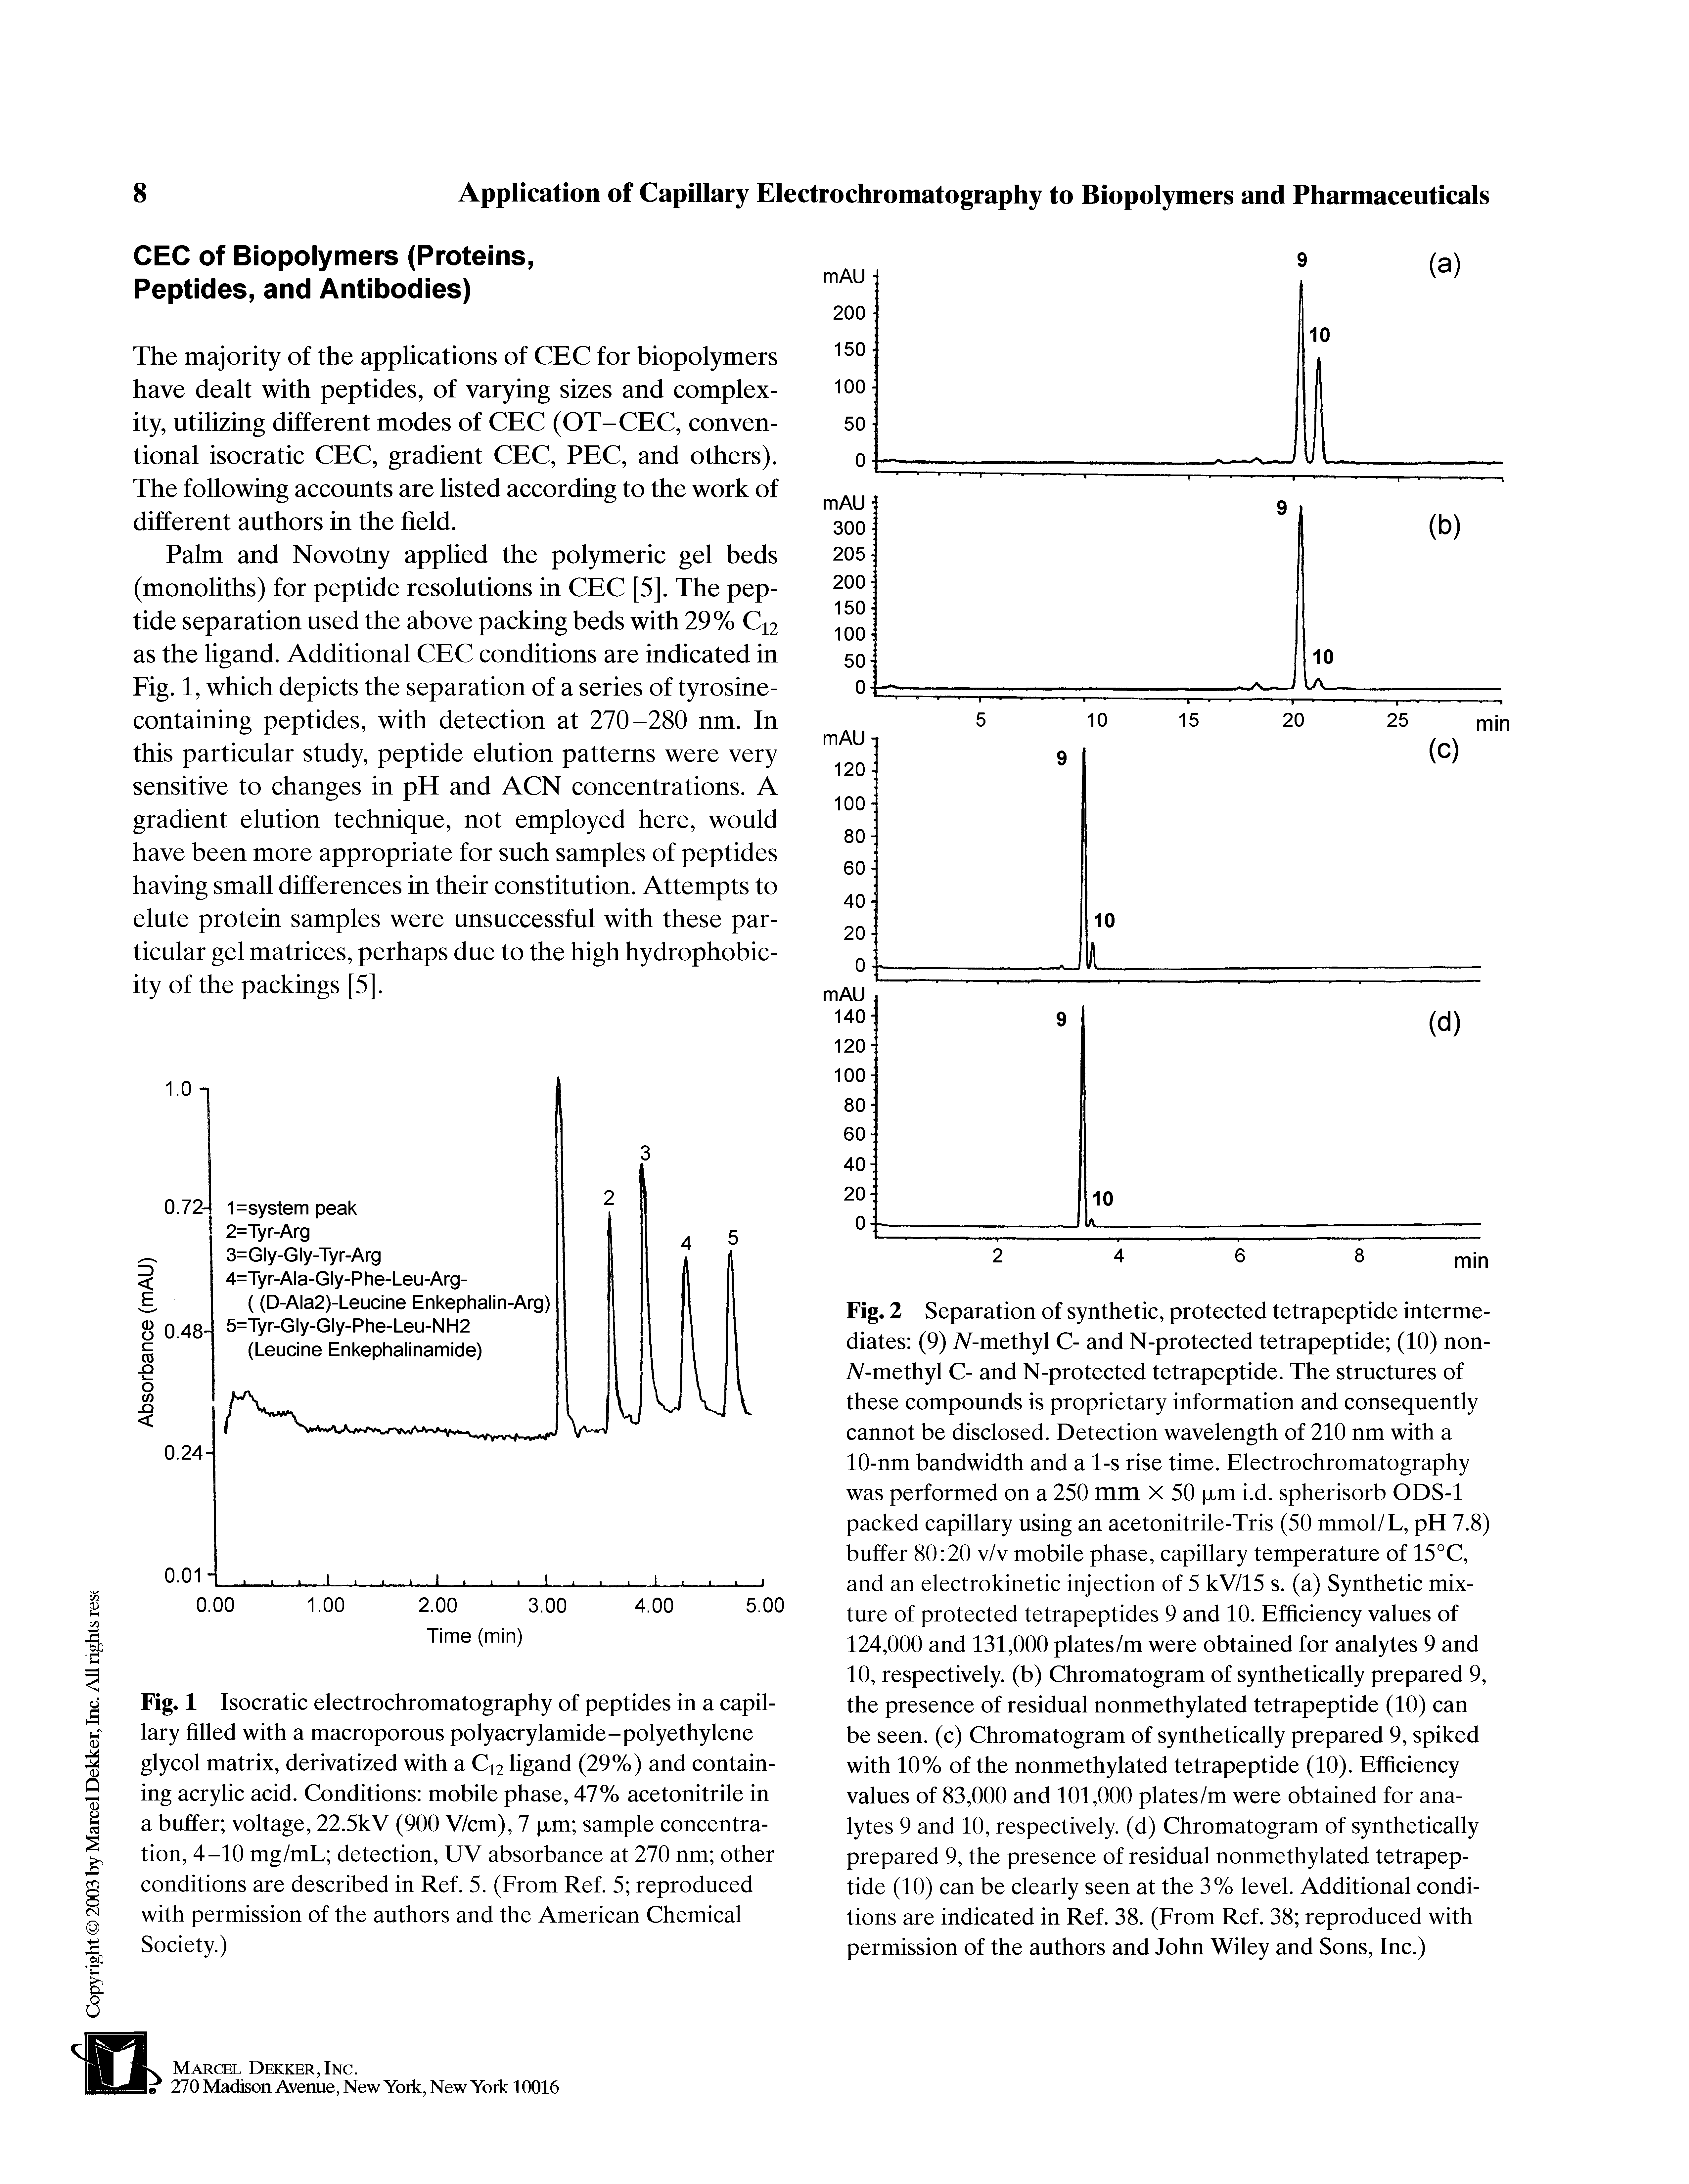 Fig. 1 Isocratic electrochromatography of peptides in a capillary filled with a macroporous polyacrylamide-polyethylene glycol matrix, derivatized with a C12 ligand (29%) and containing acrylic acid. Conditions mobile phase, 47% acetonitrile in a buffer voltage, 22.5kV (900 V/cm), 7 [jim sample concentration, 4-10 mg/mL detection, UV absorbance at 270 nm other conditions are described in Ref. 5. (From Ref. 5 reproduced with permission of the authors and the American Chemical Society.)...